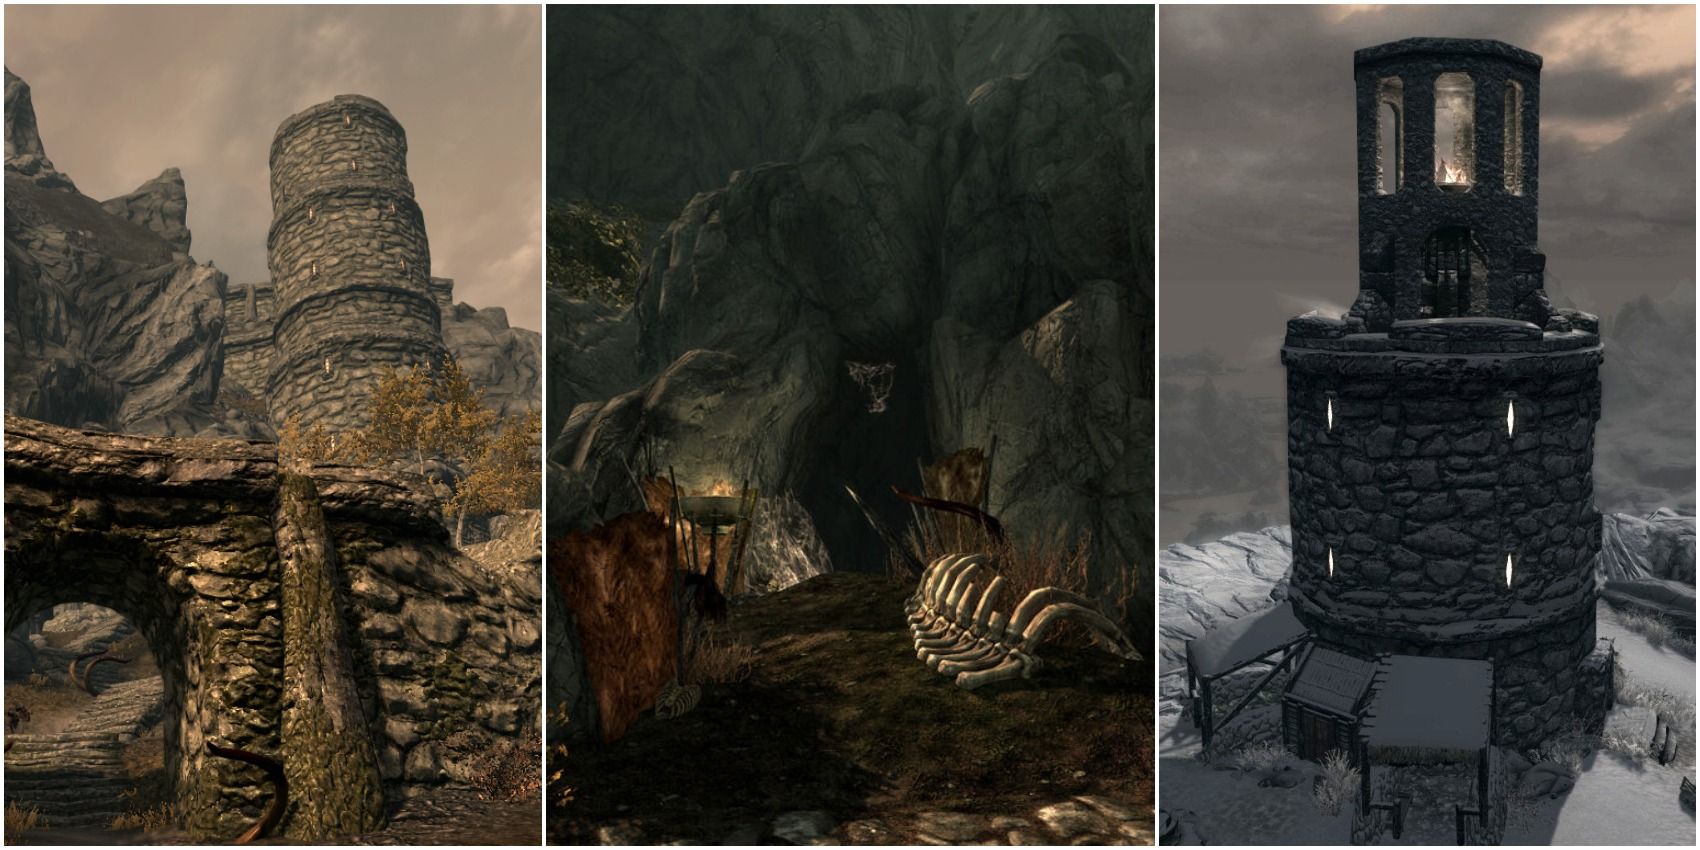 Skyrim underrated dungeons that are great but few players find.